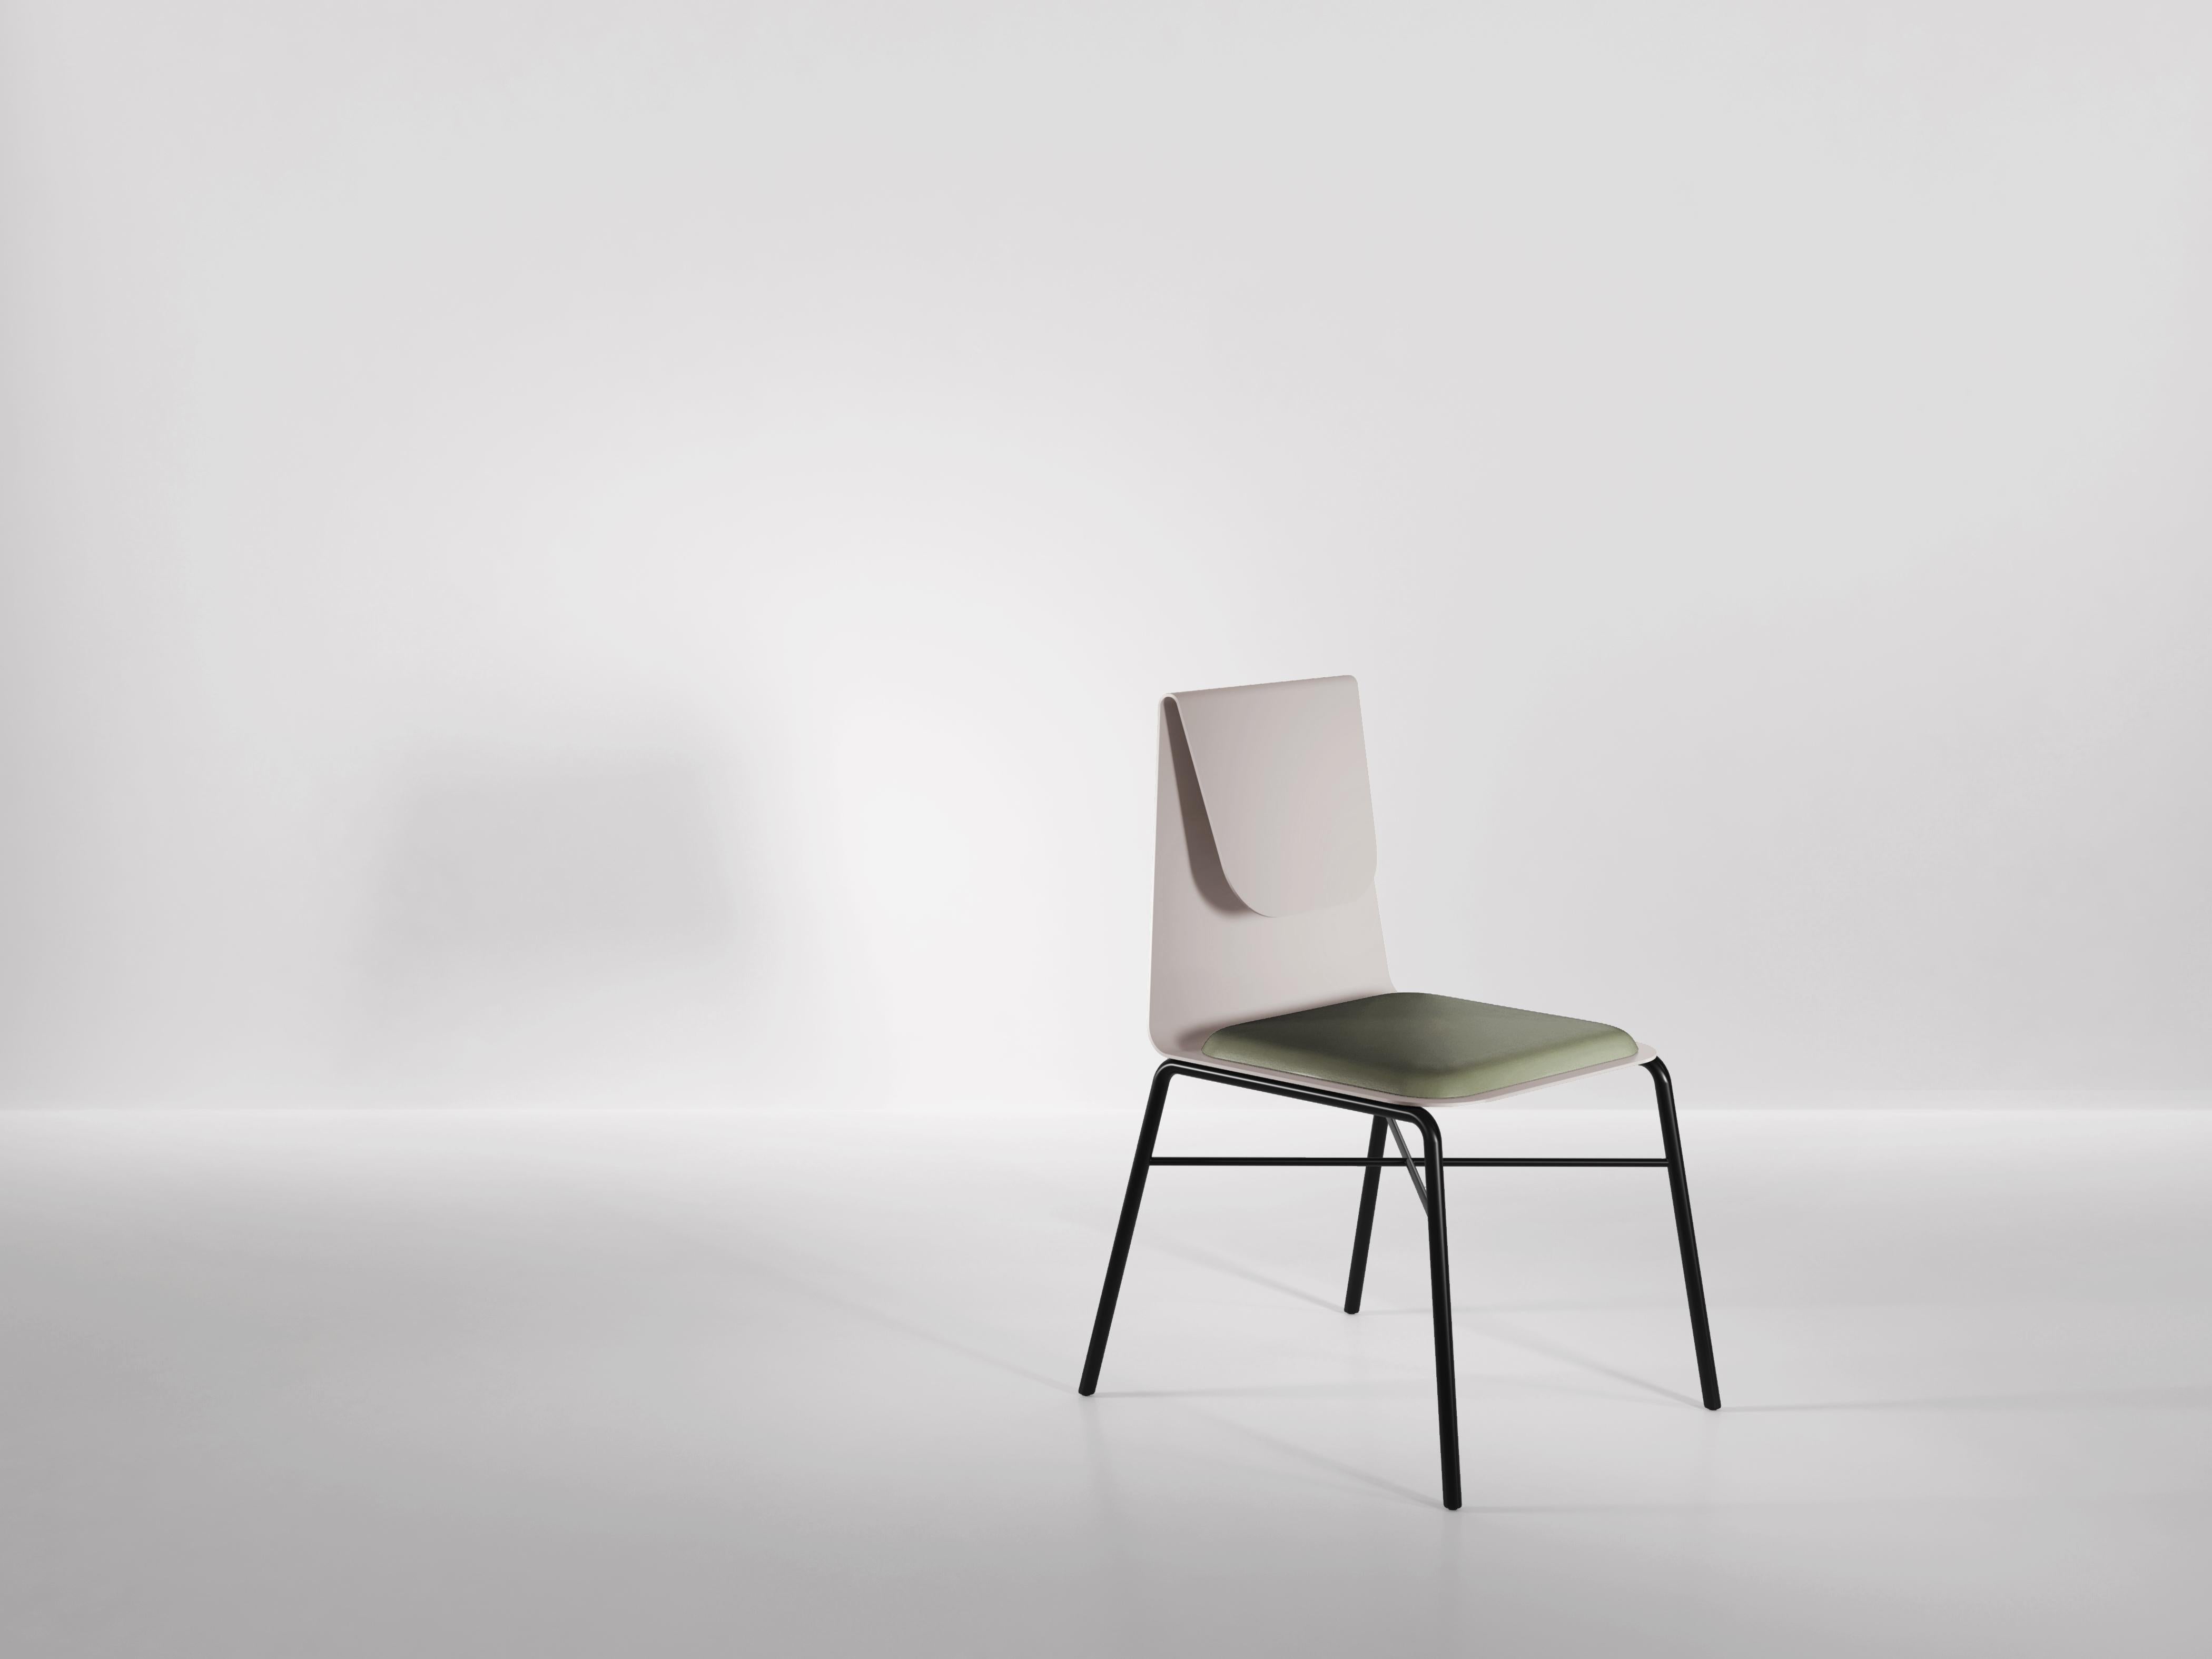 The Fold dining chair is constructed from one piece of metal - bent in two places to offer both support and flexibility when leaned upon. A fully customisable, upholstered cushion sits on top of the metal for added comfort. The seat is supported by